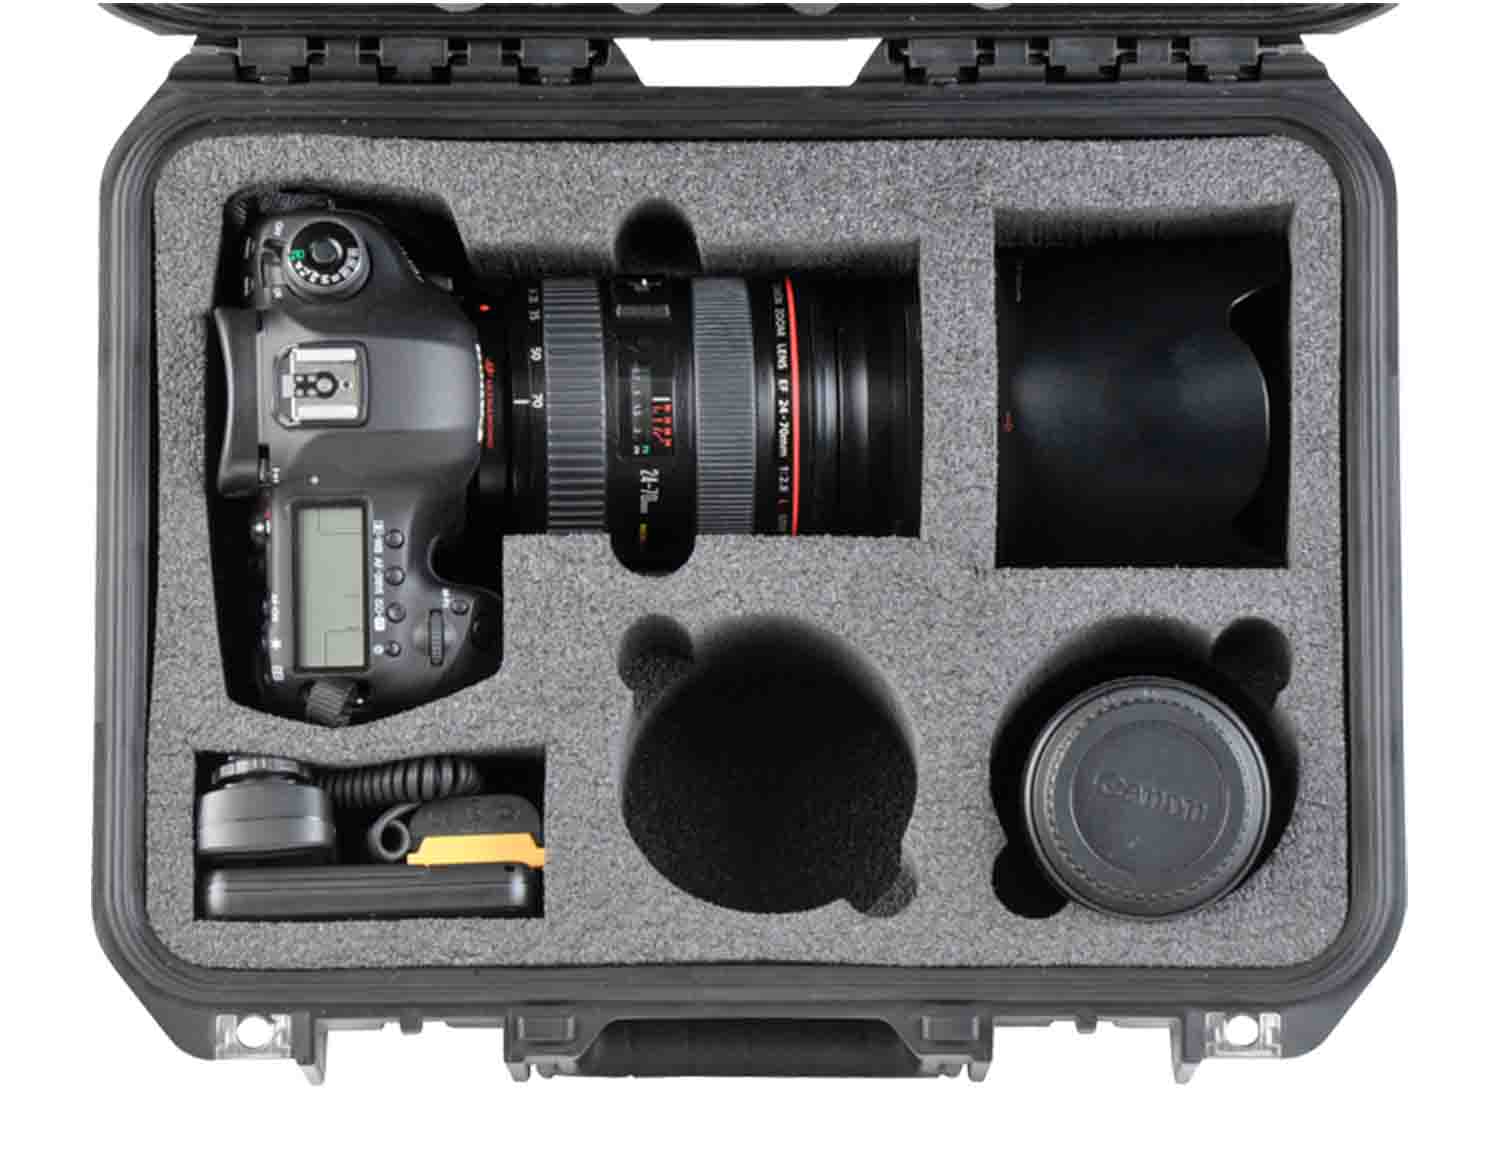 SKB Cases 3i-13096SLR1 iSeries Injection Molded Waterproof Case I for DSLR Cameras and Accessories - Hollywood DJ